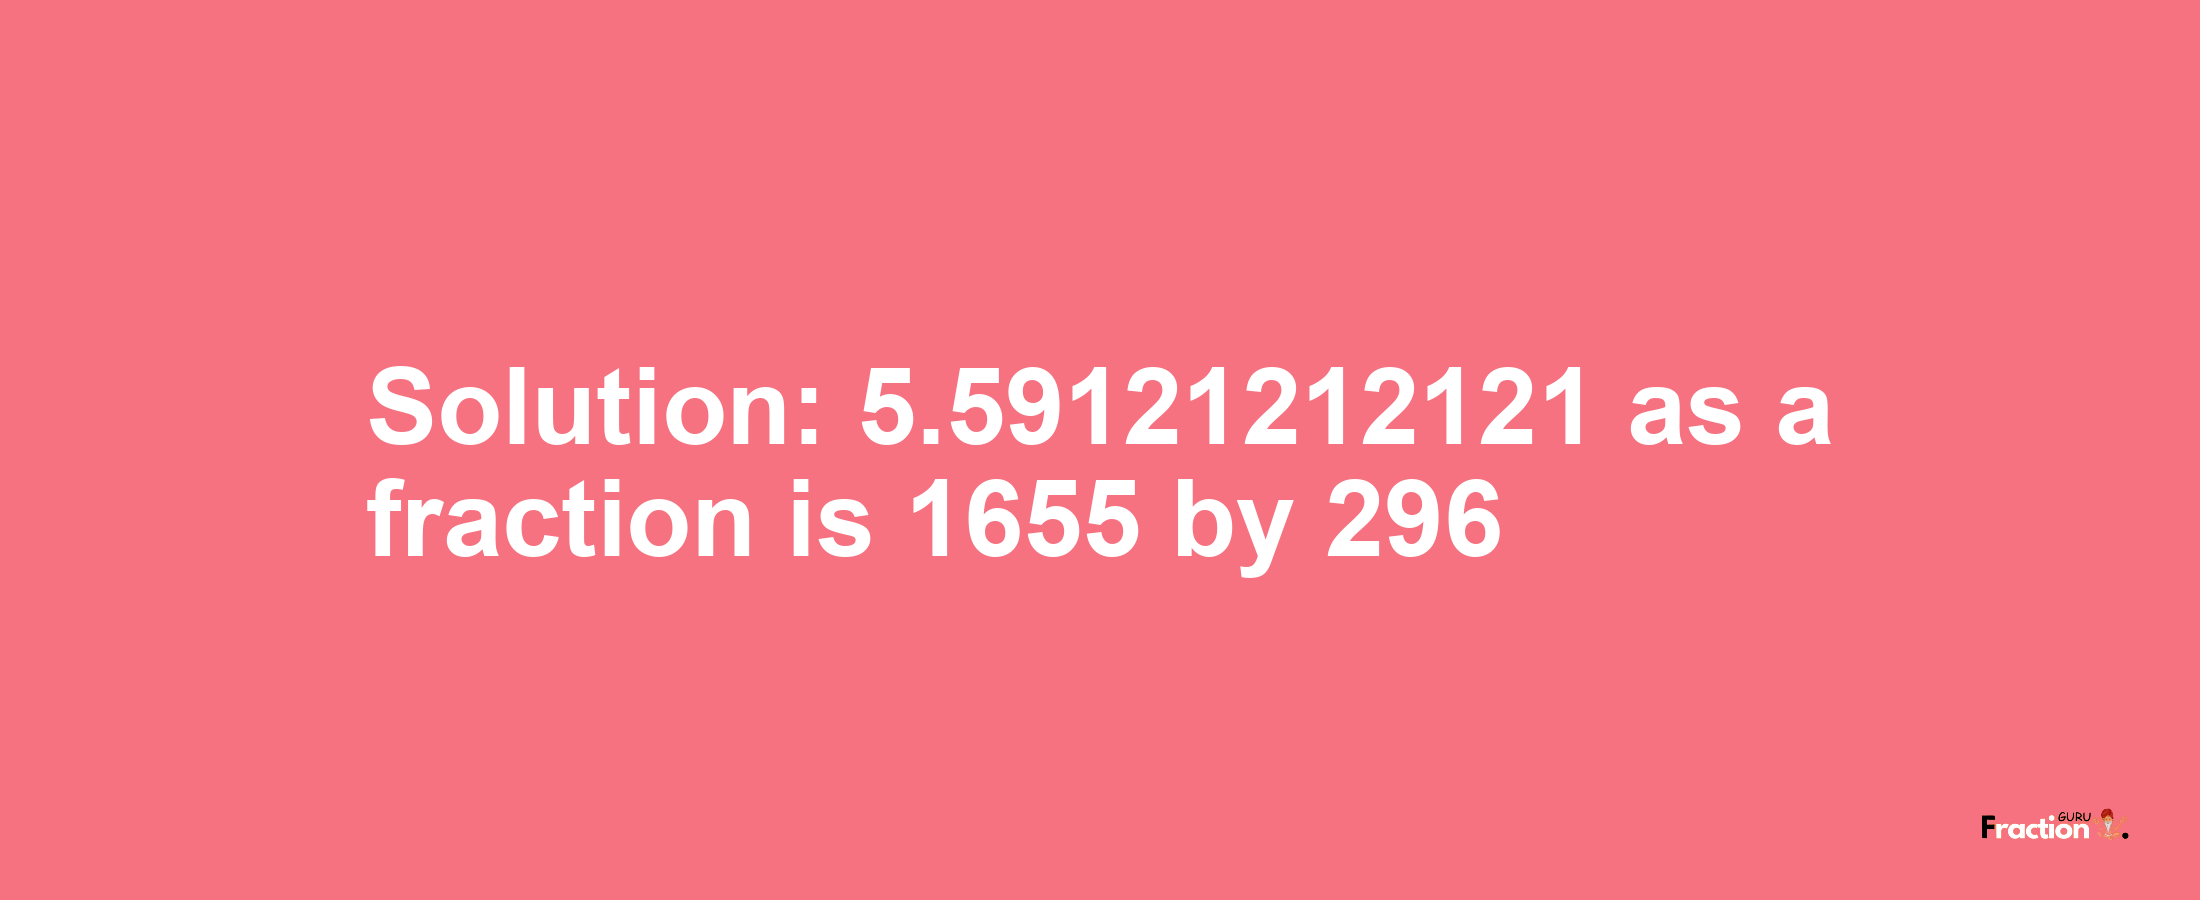 Solution:5.59121212121 as a fraction is 1655/296